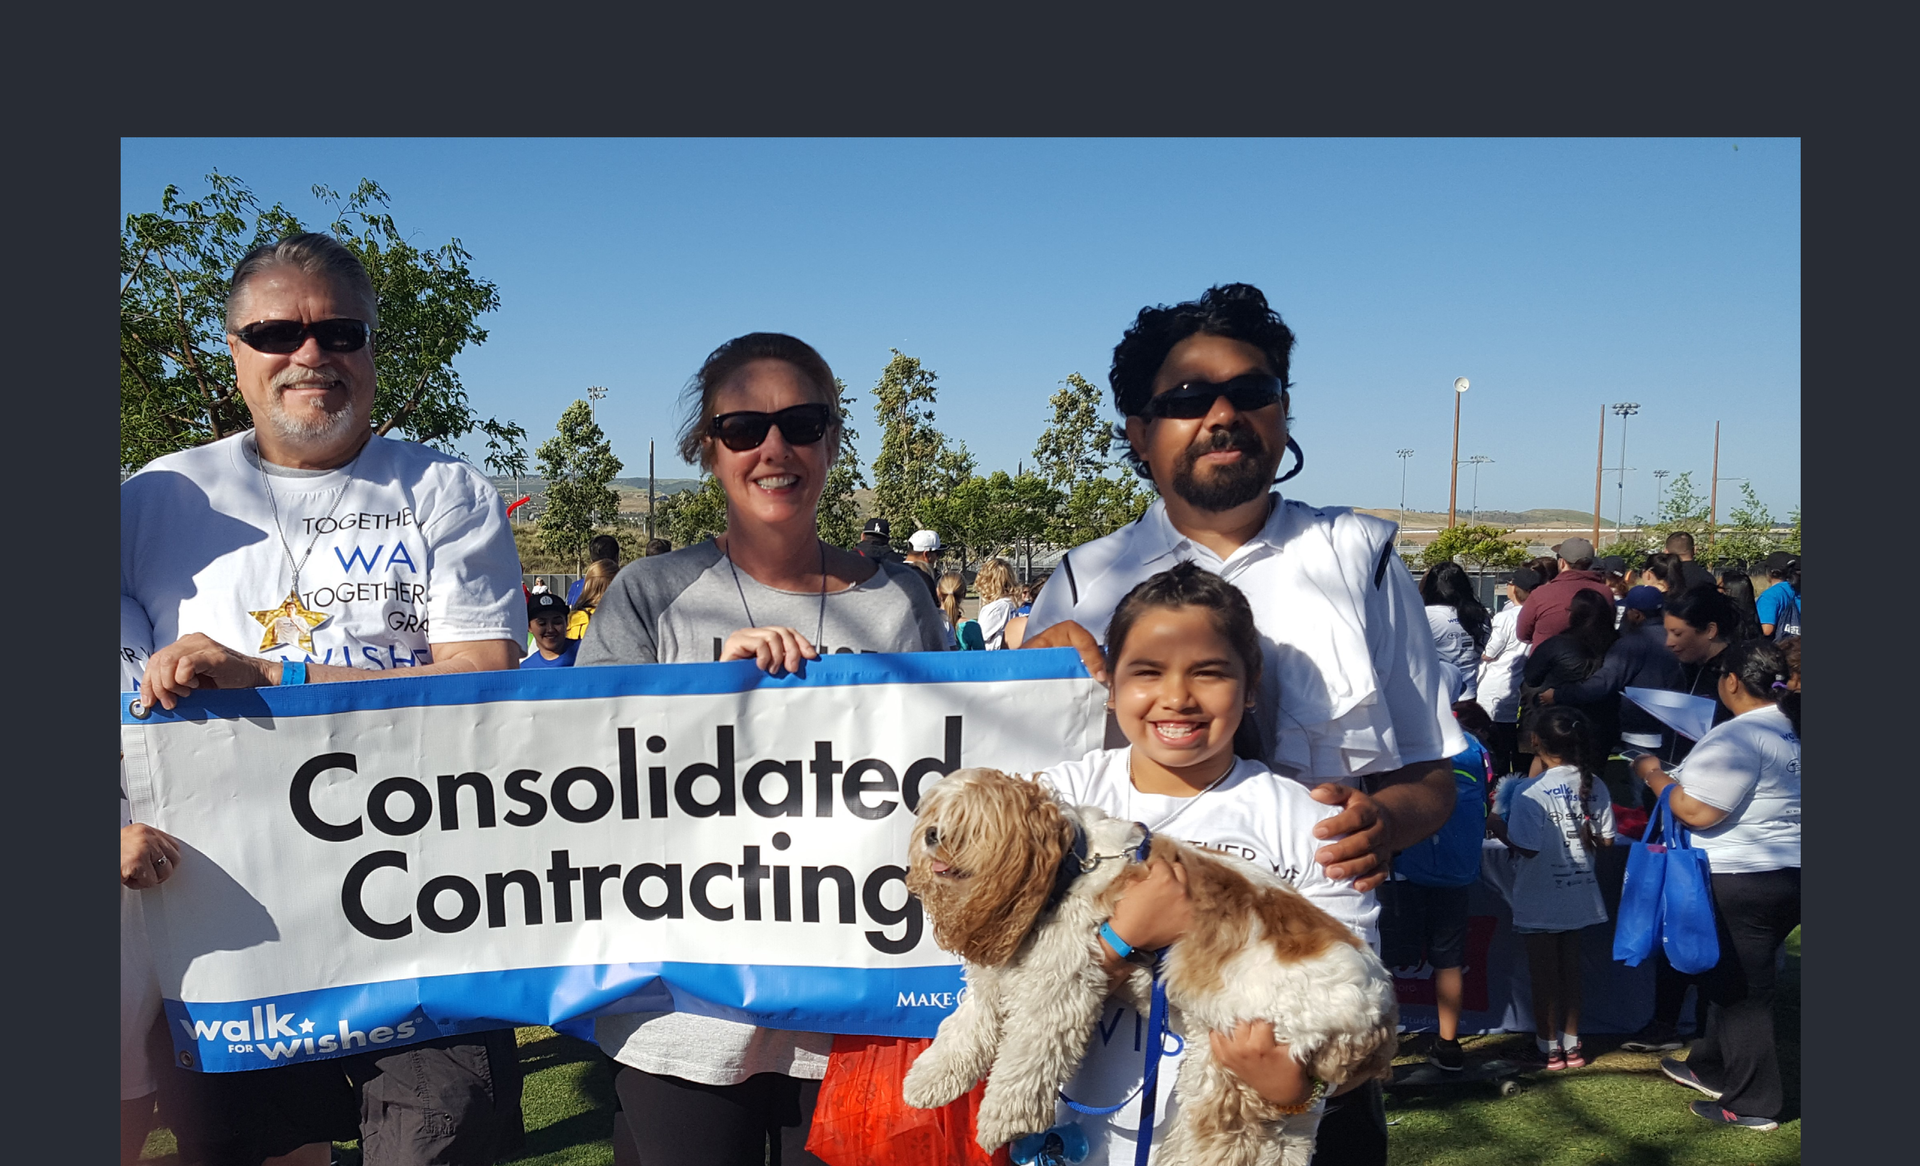 Walk for Wishes — San Clemente, CA — Consolidated Contracting